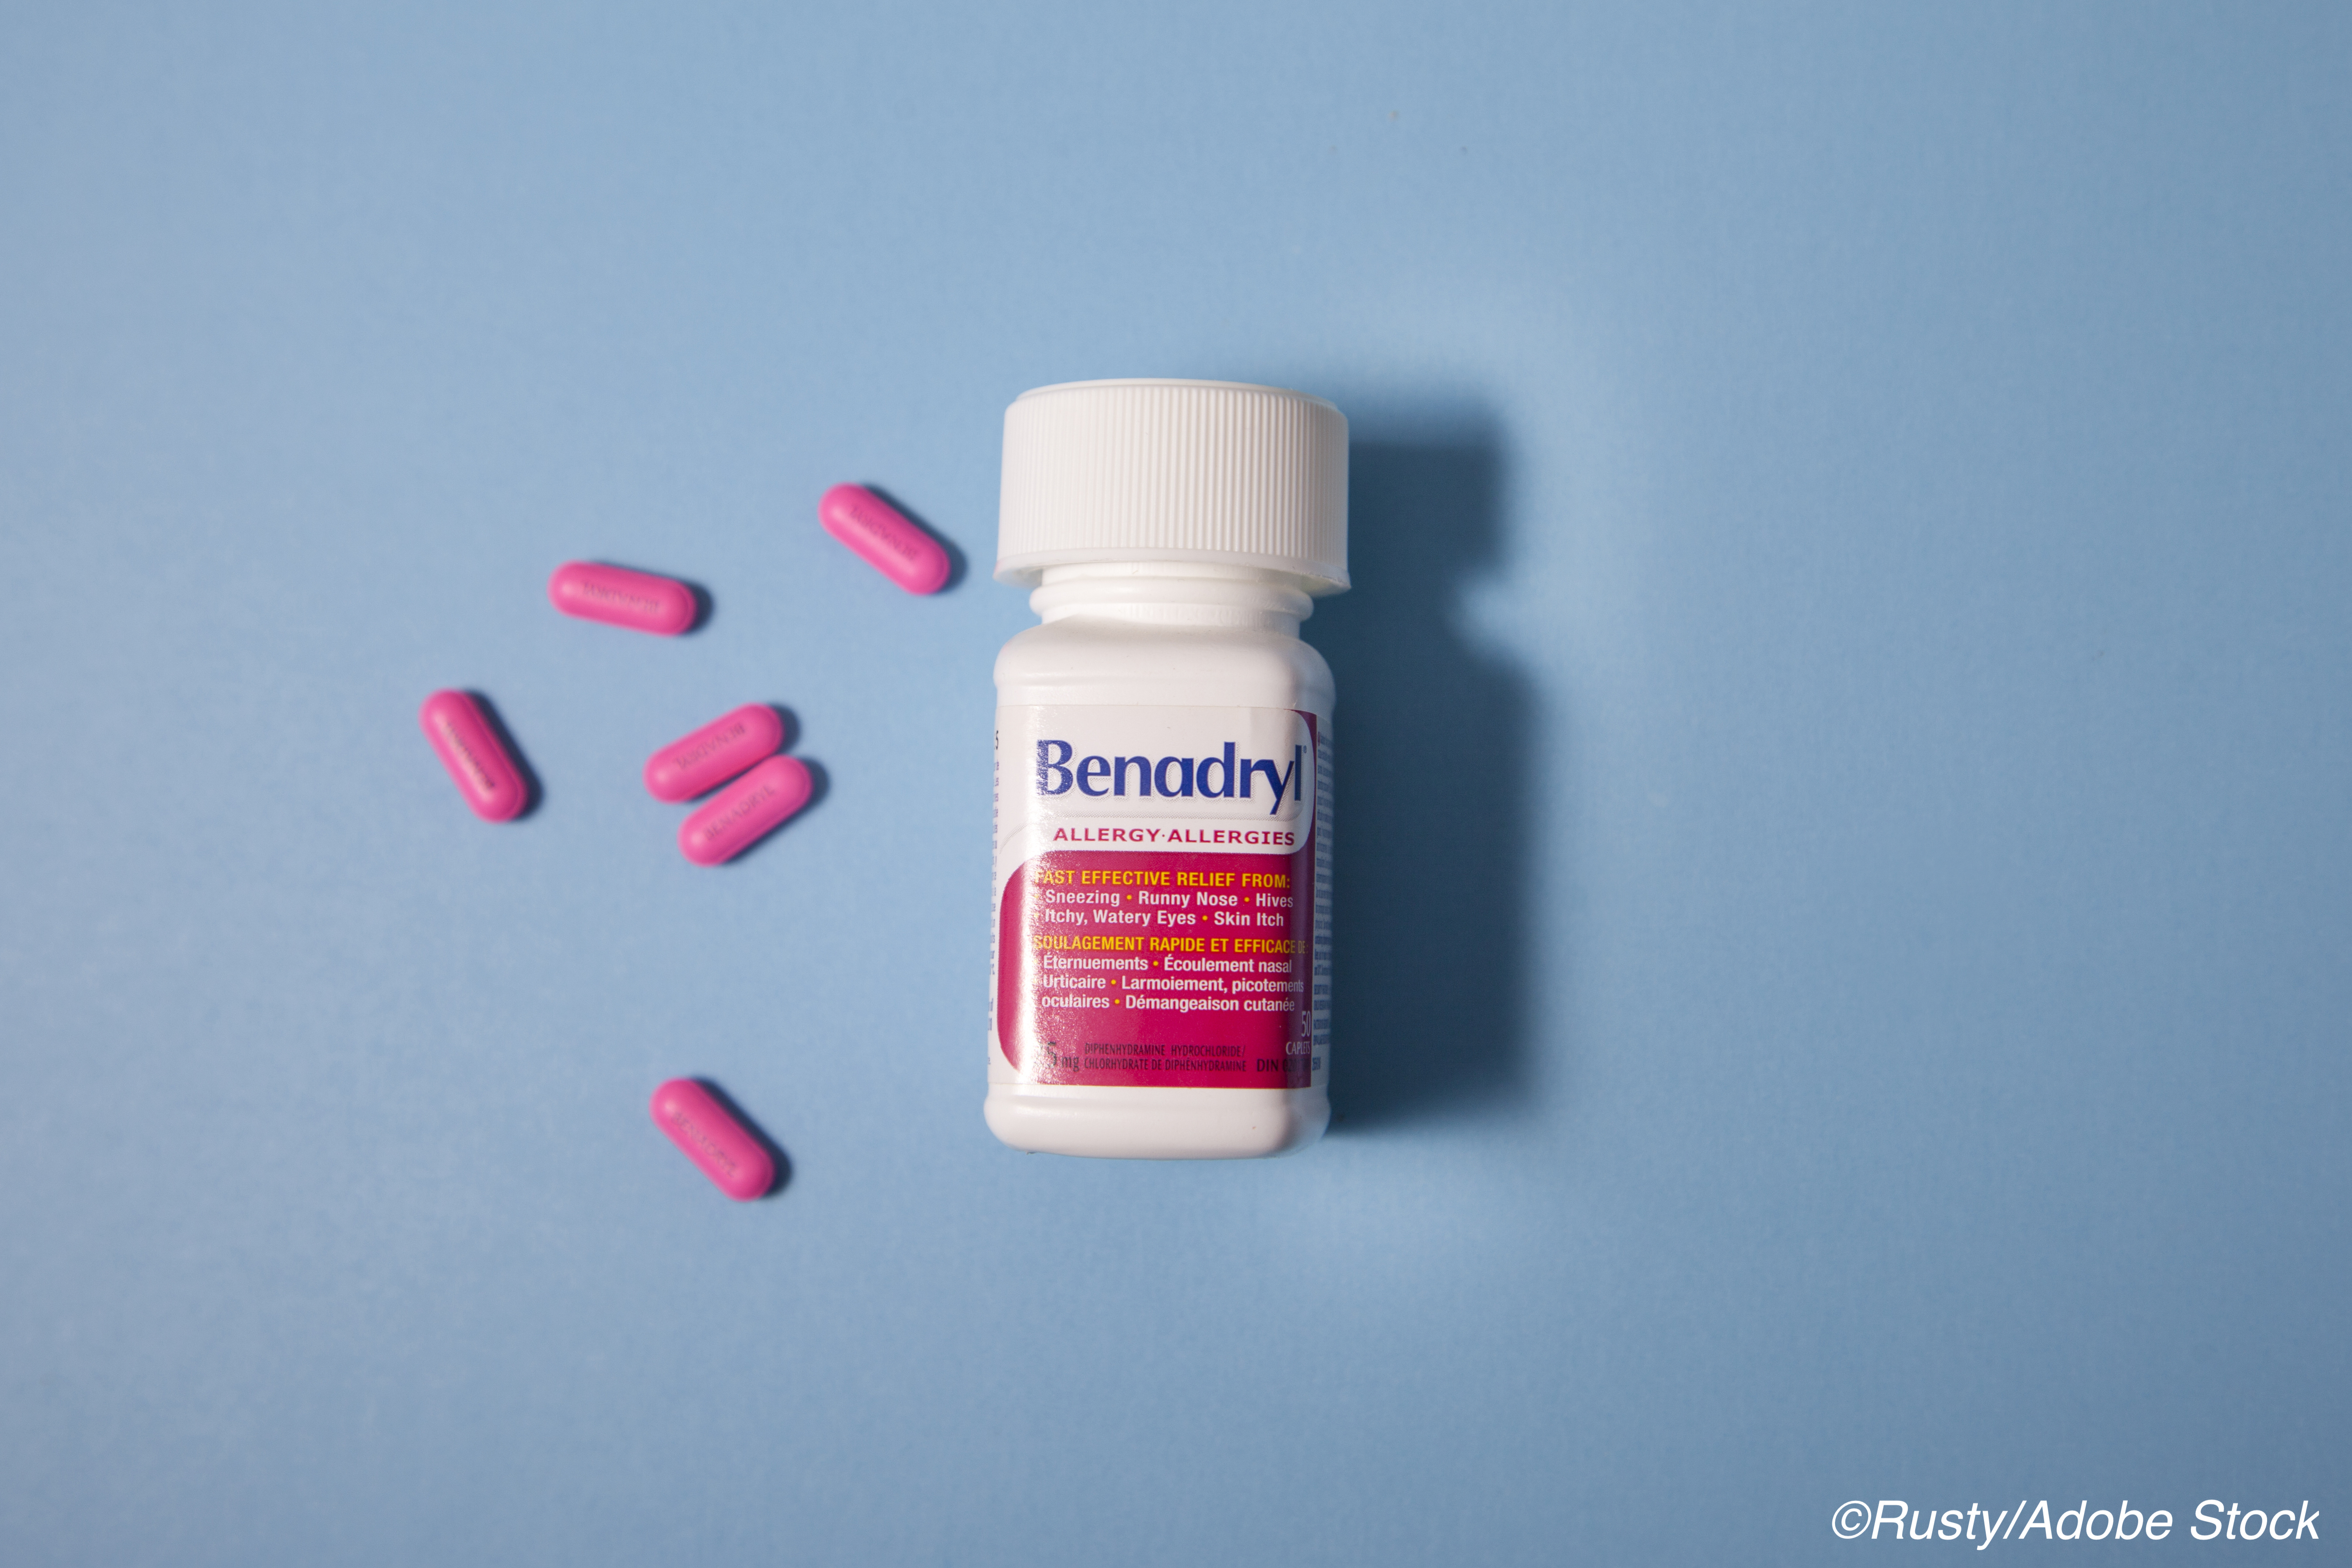 FDA Warns that ’Benadryl Challenge’ Can Have Deadly Side Effects for Teens